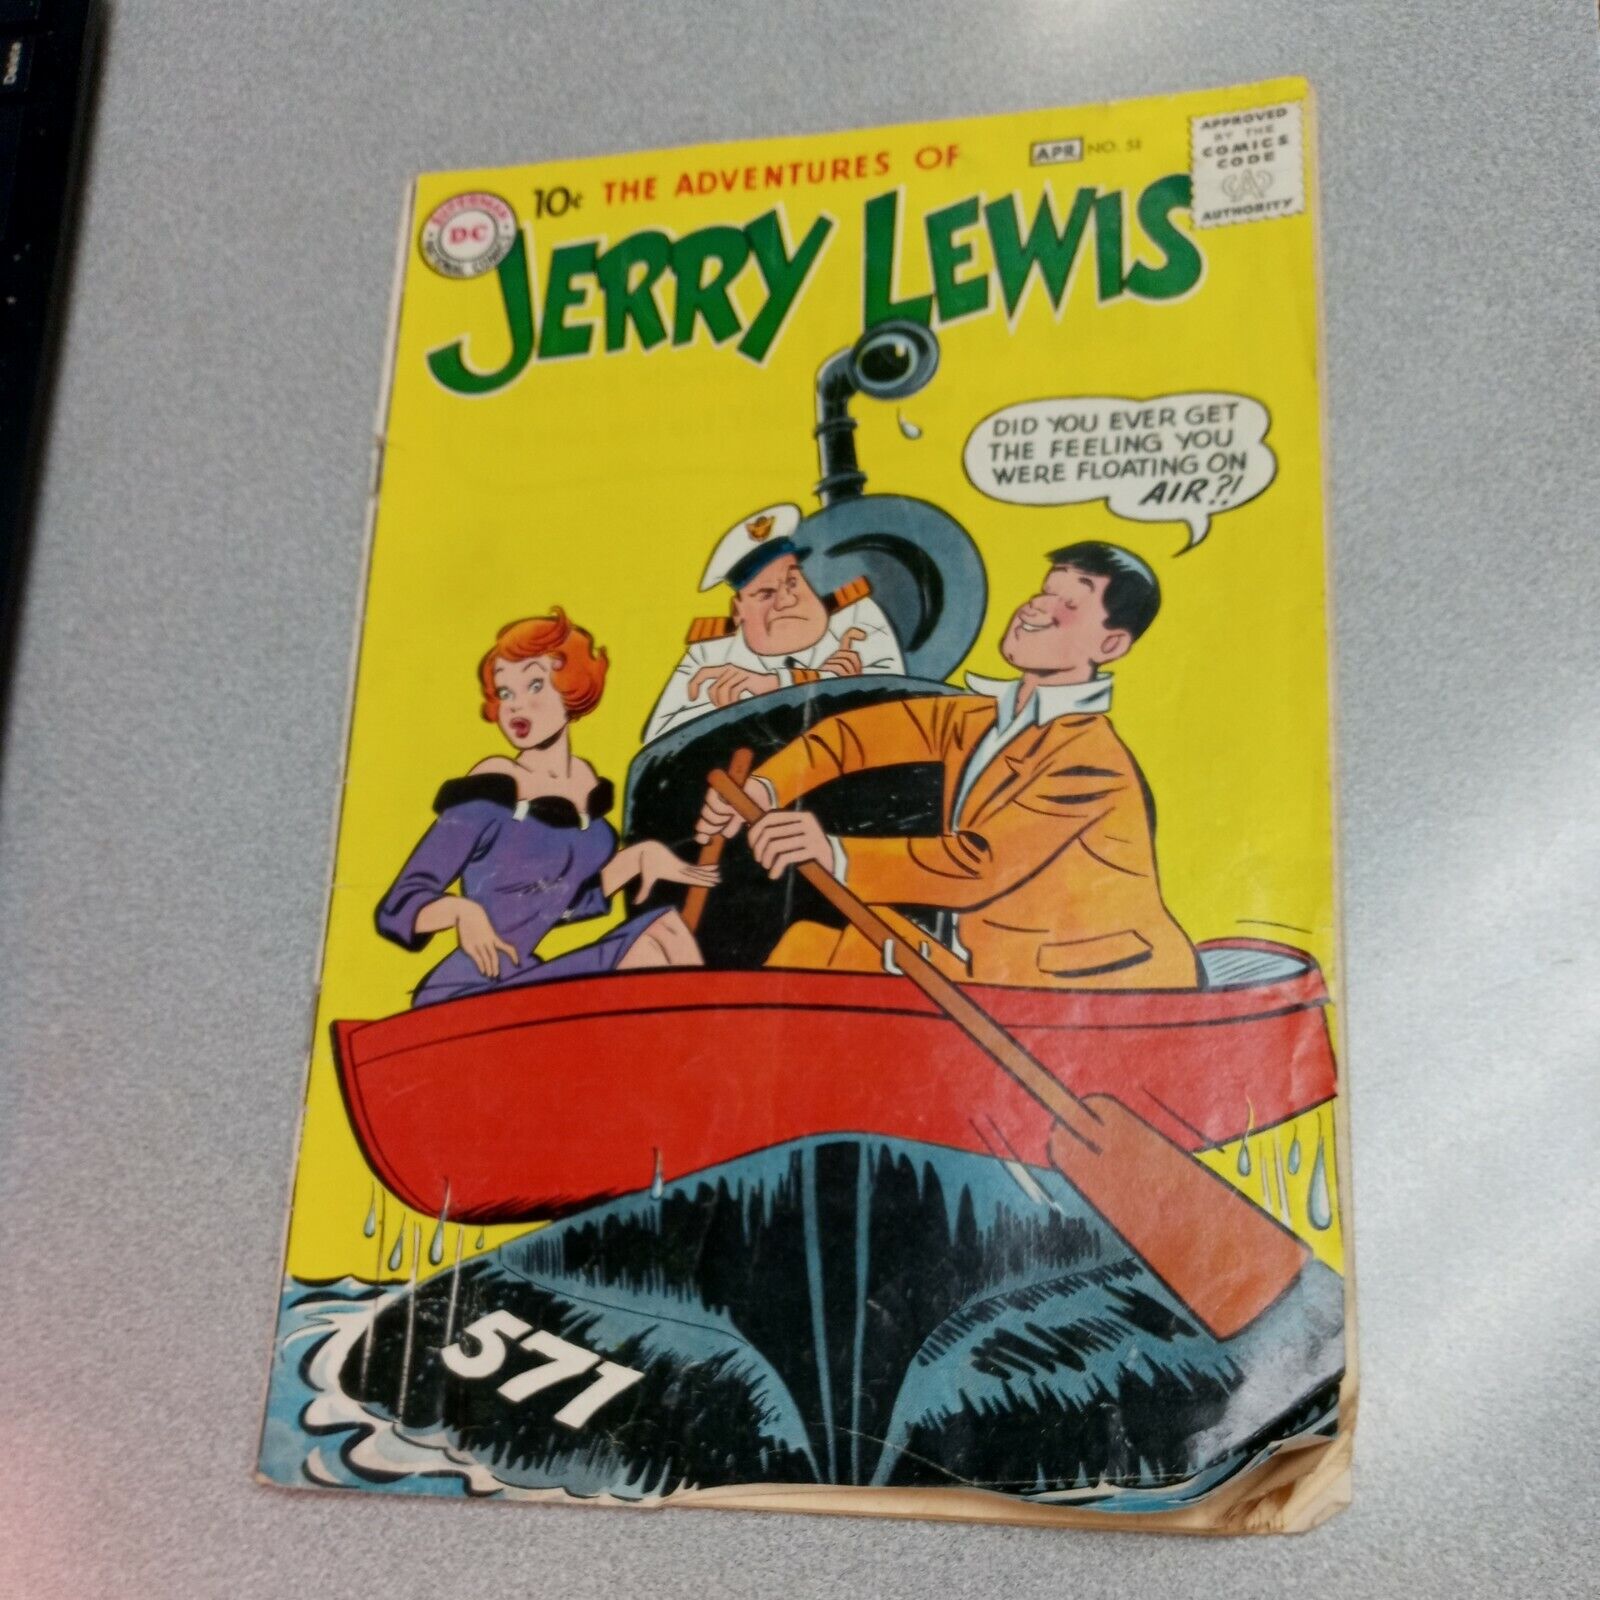 Adventures of Jerry Lewis #51 Silver Age DC Comics 1959 teen humor comedy book